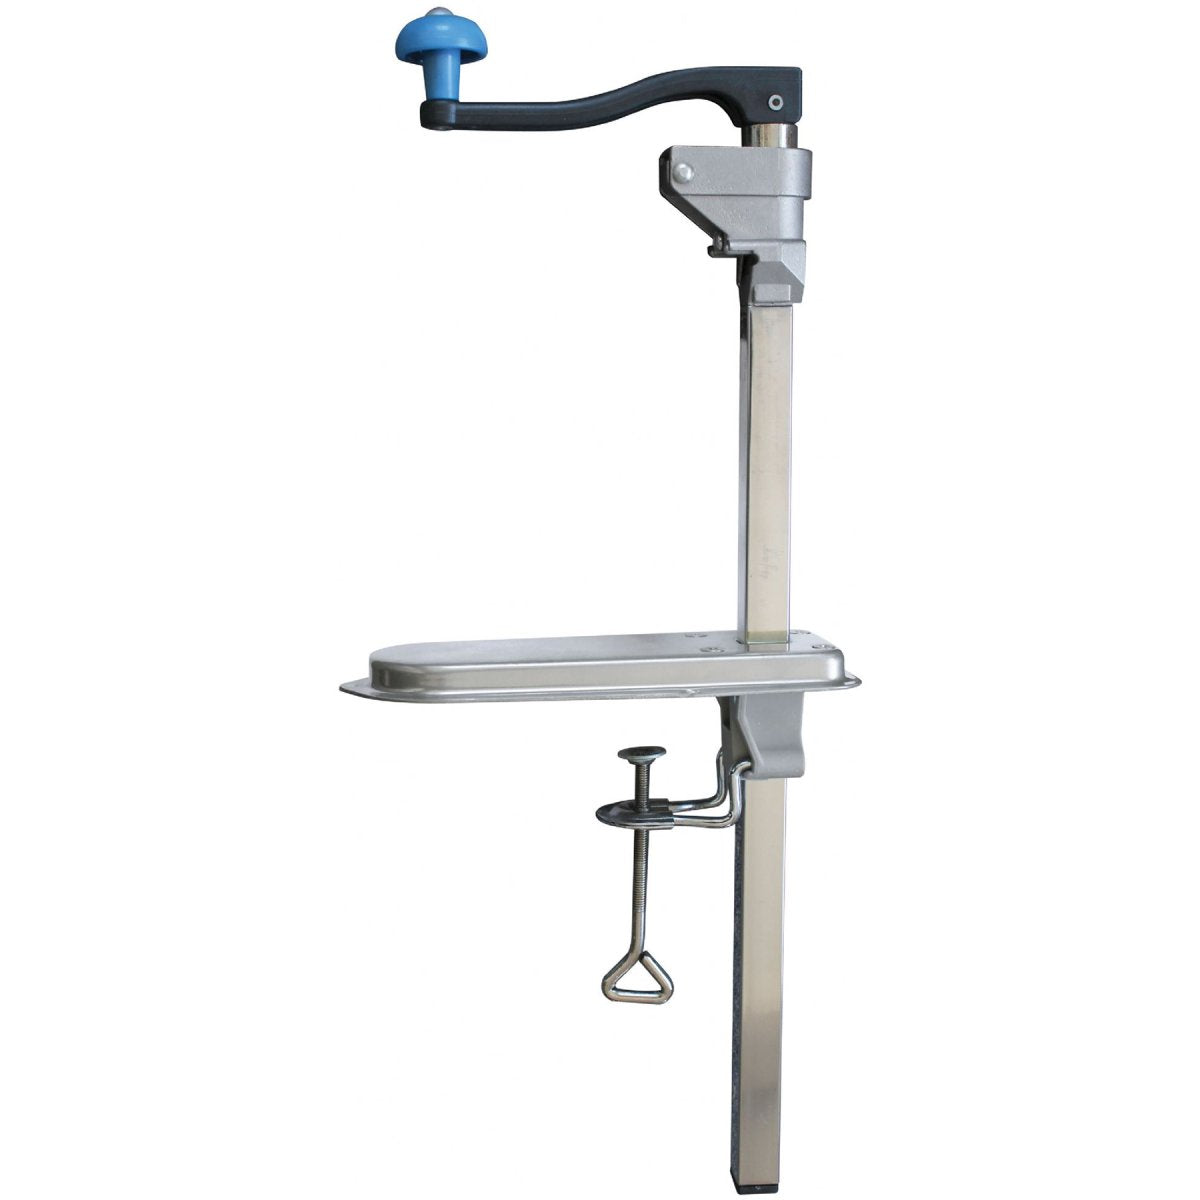 Professional Bench Can Opener Heavy duty 480mm Rental